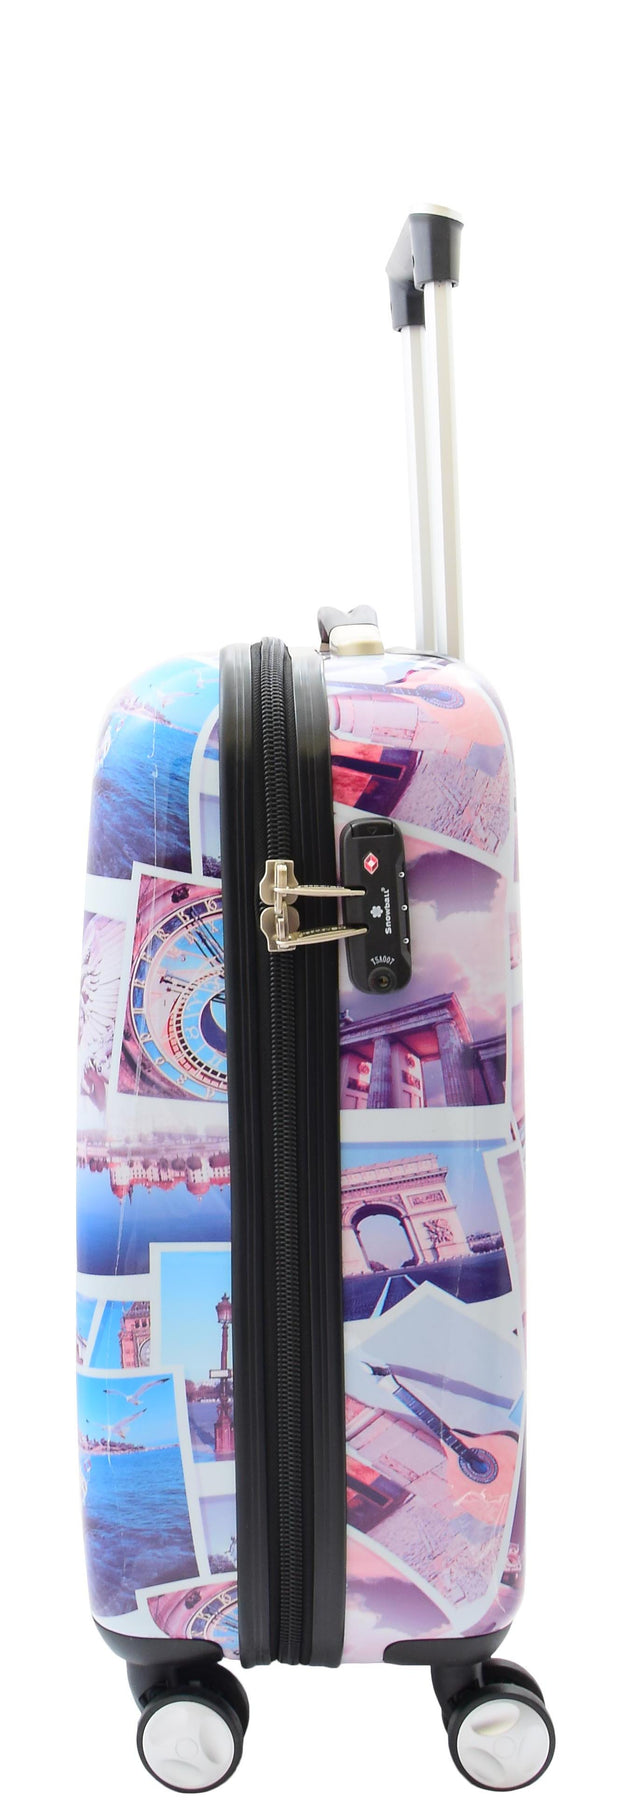 Copy of 4 Wheel Luggage Hard Shell Expandable Suitcases Lightweight Travel Bags Post Cards Print